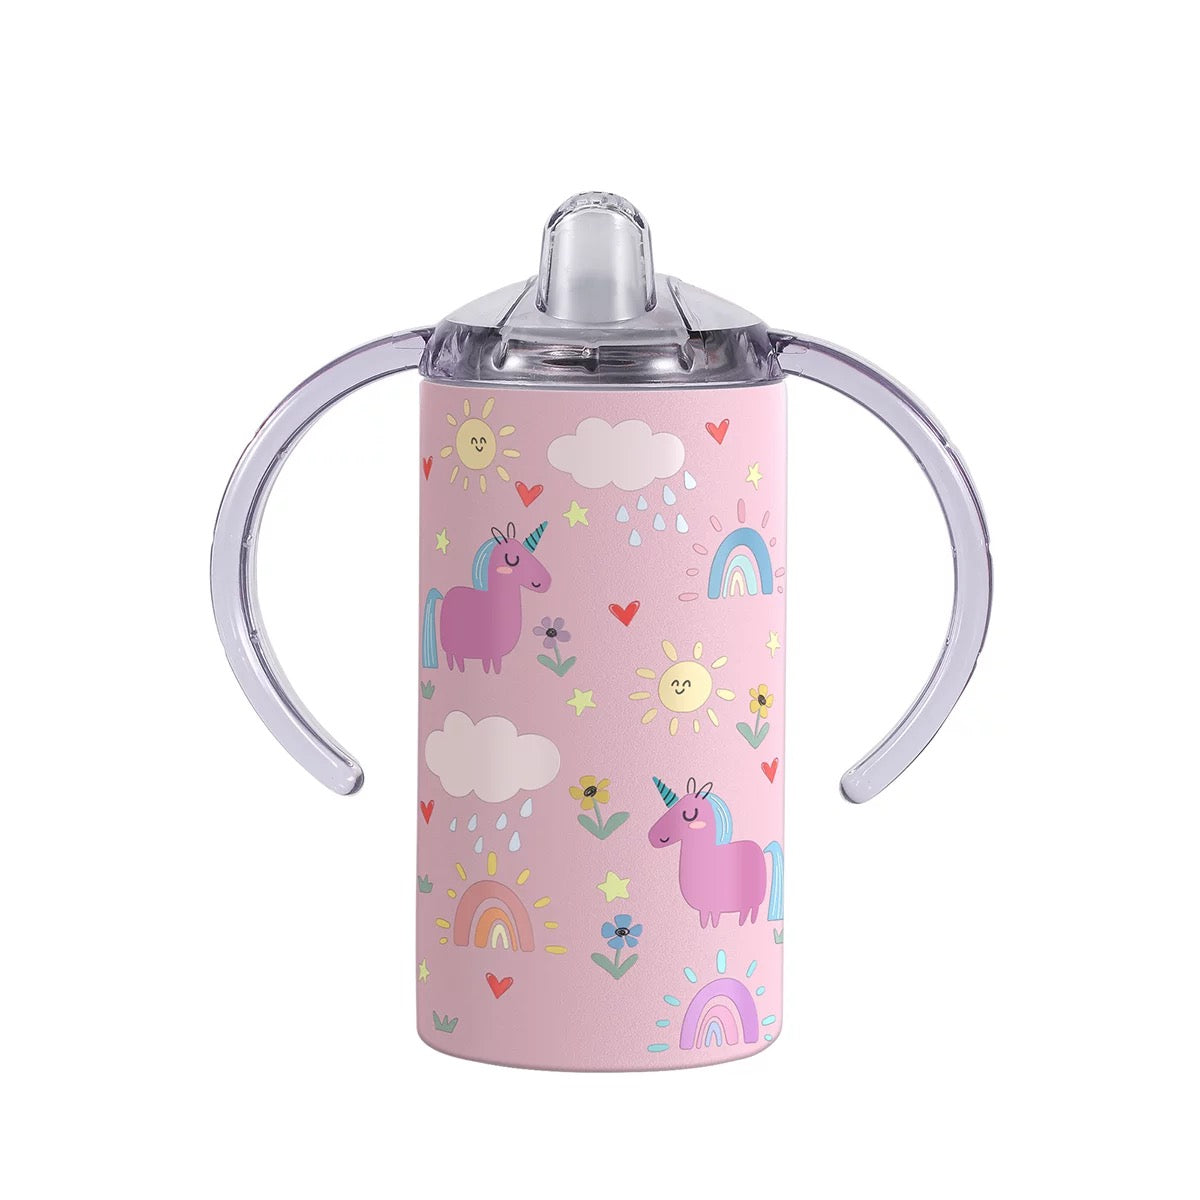 Kids sippy cup